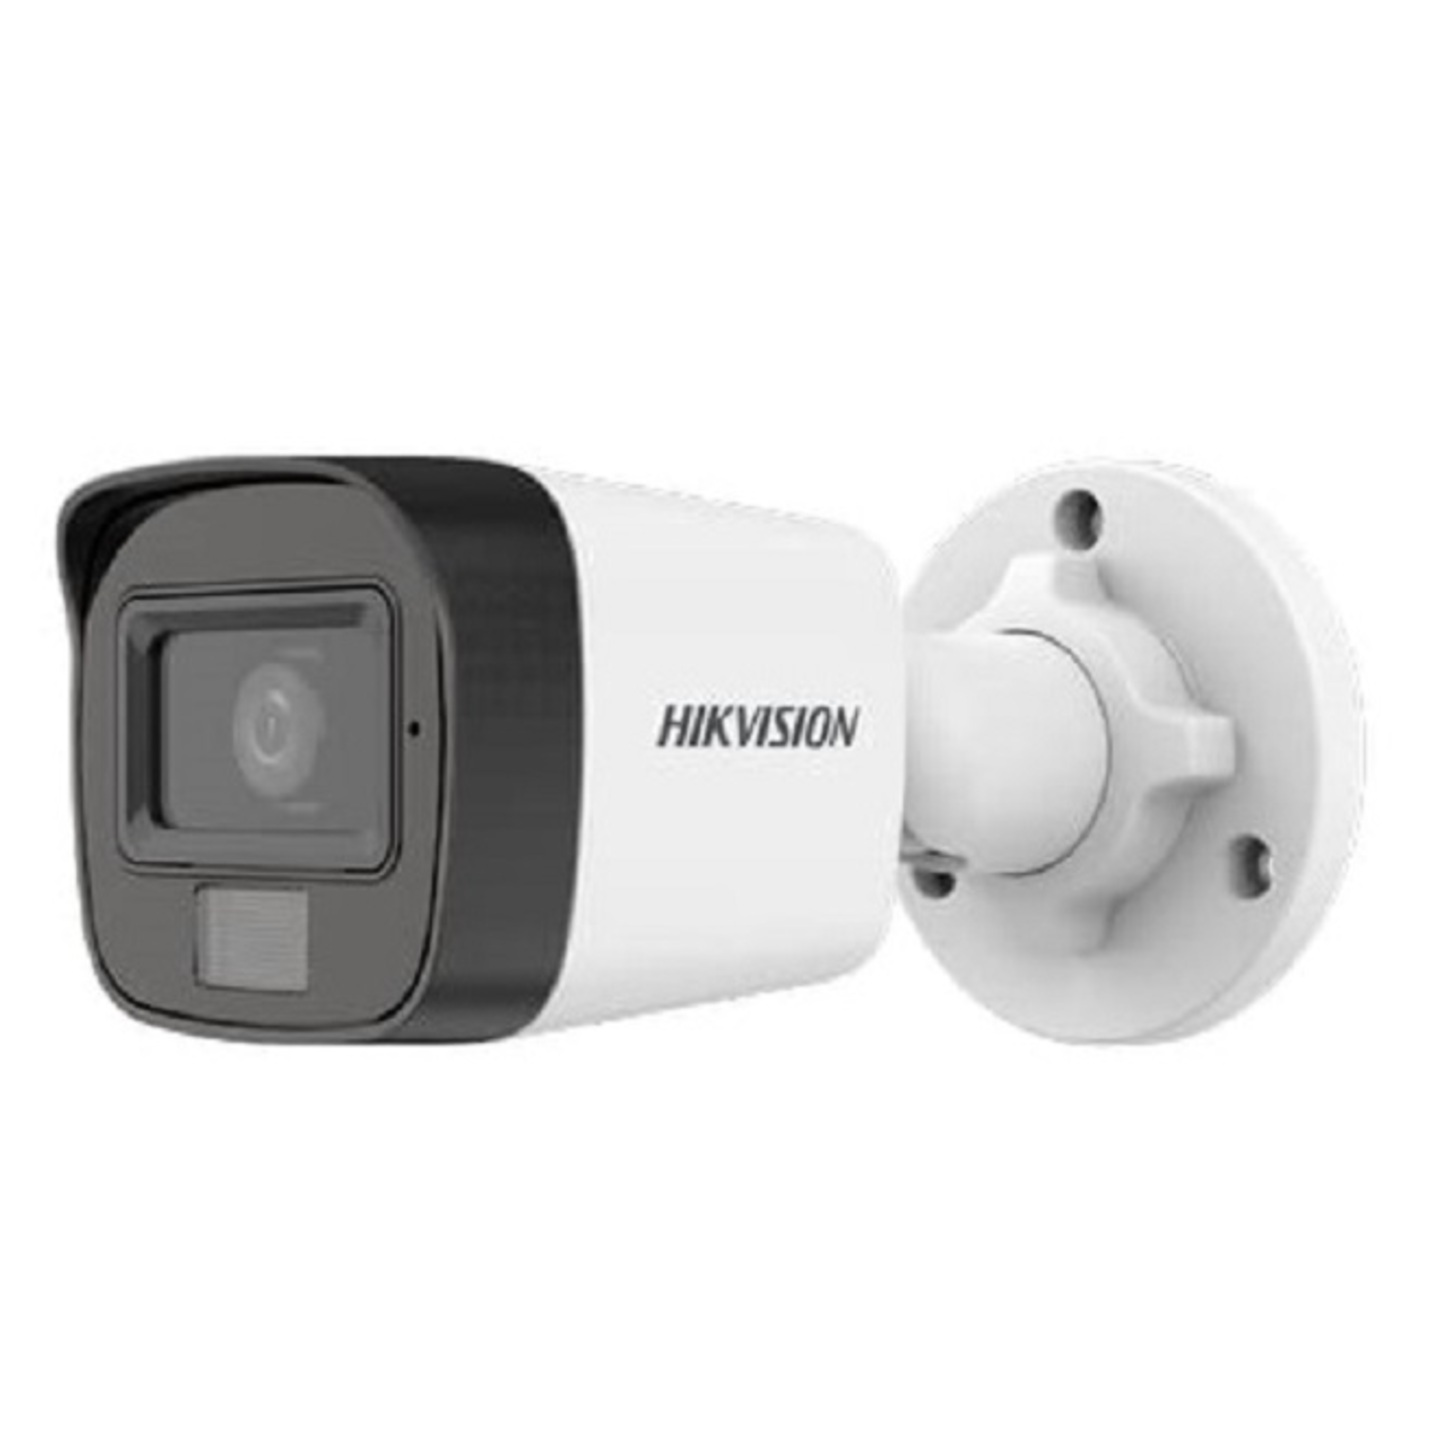 HIKVISION Turbo HD 2MP Bullet CCTV Camera Model - DS-2CE1AD0T-ITPECO